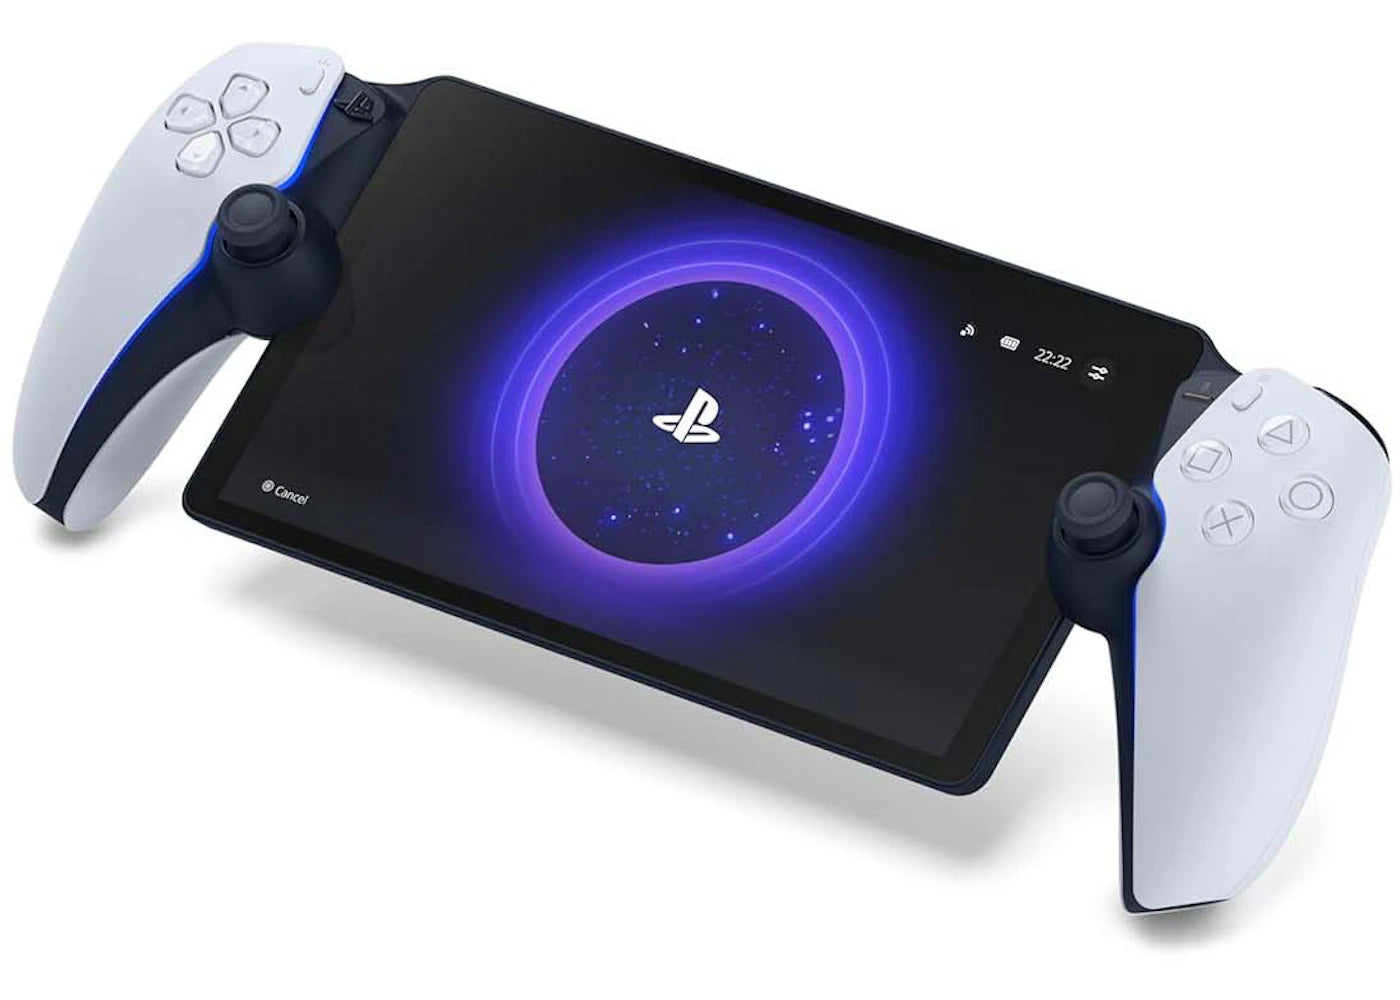 The Game Awards on X: The PS5 Portal - Remote Player device will launch  November 15.  / X